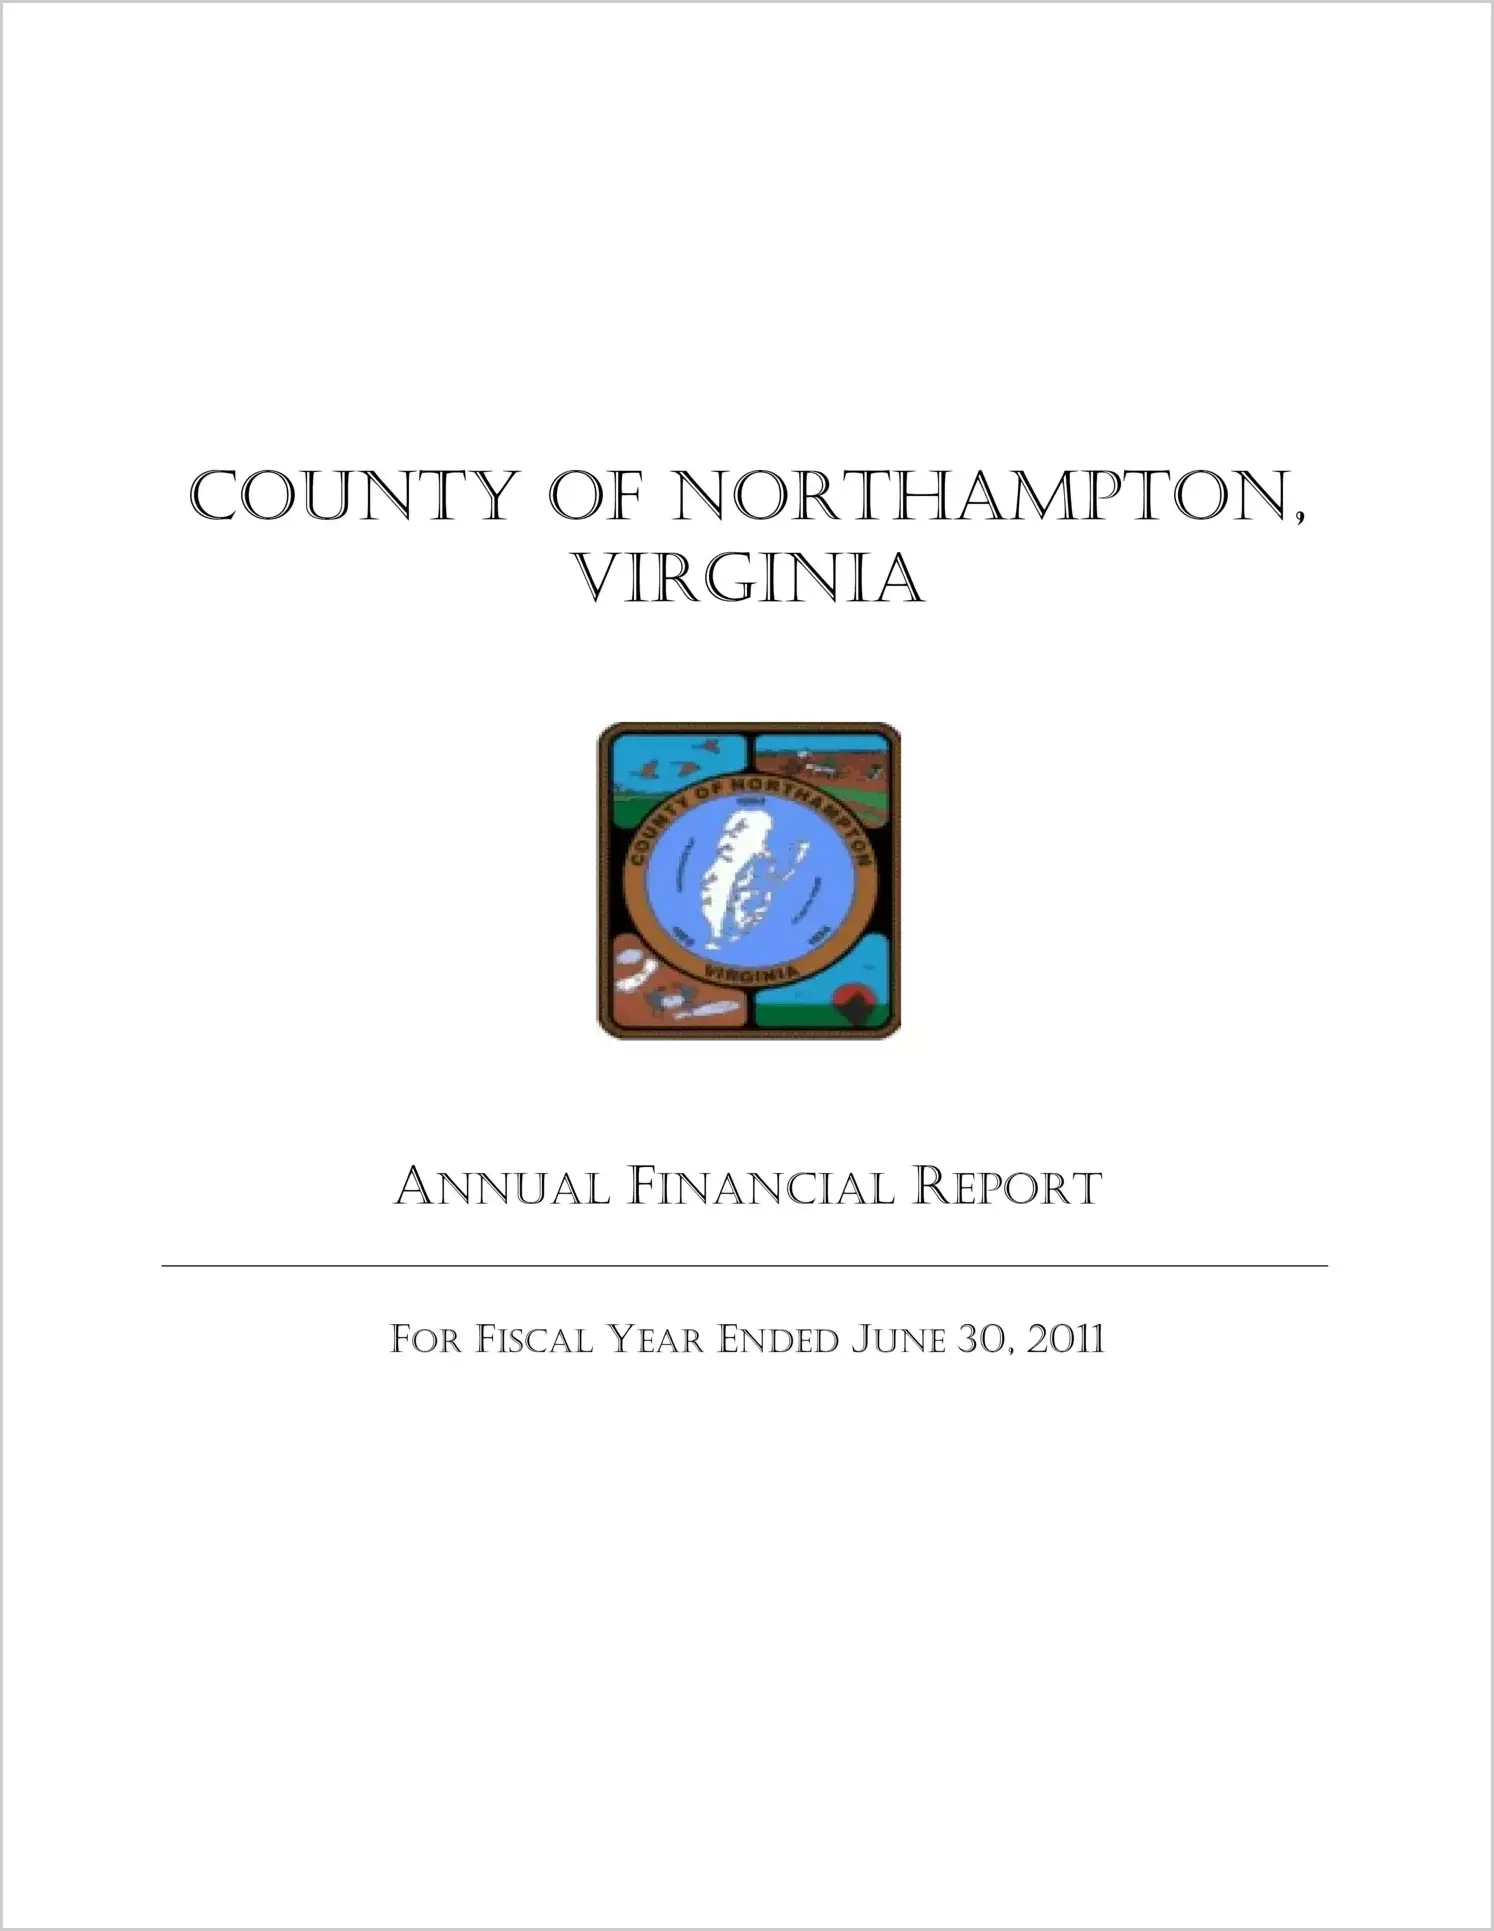 2011 Annual Financial Report for County of Northampton